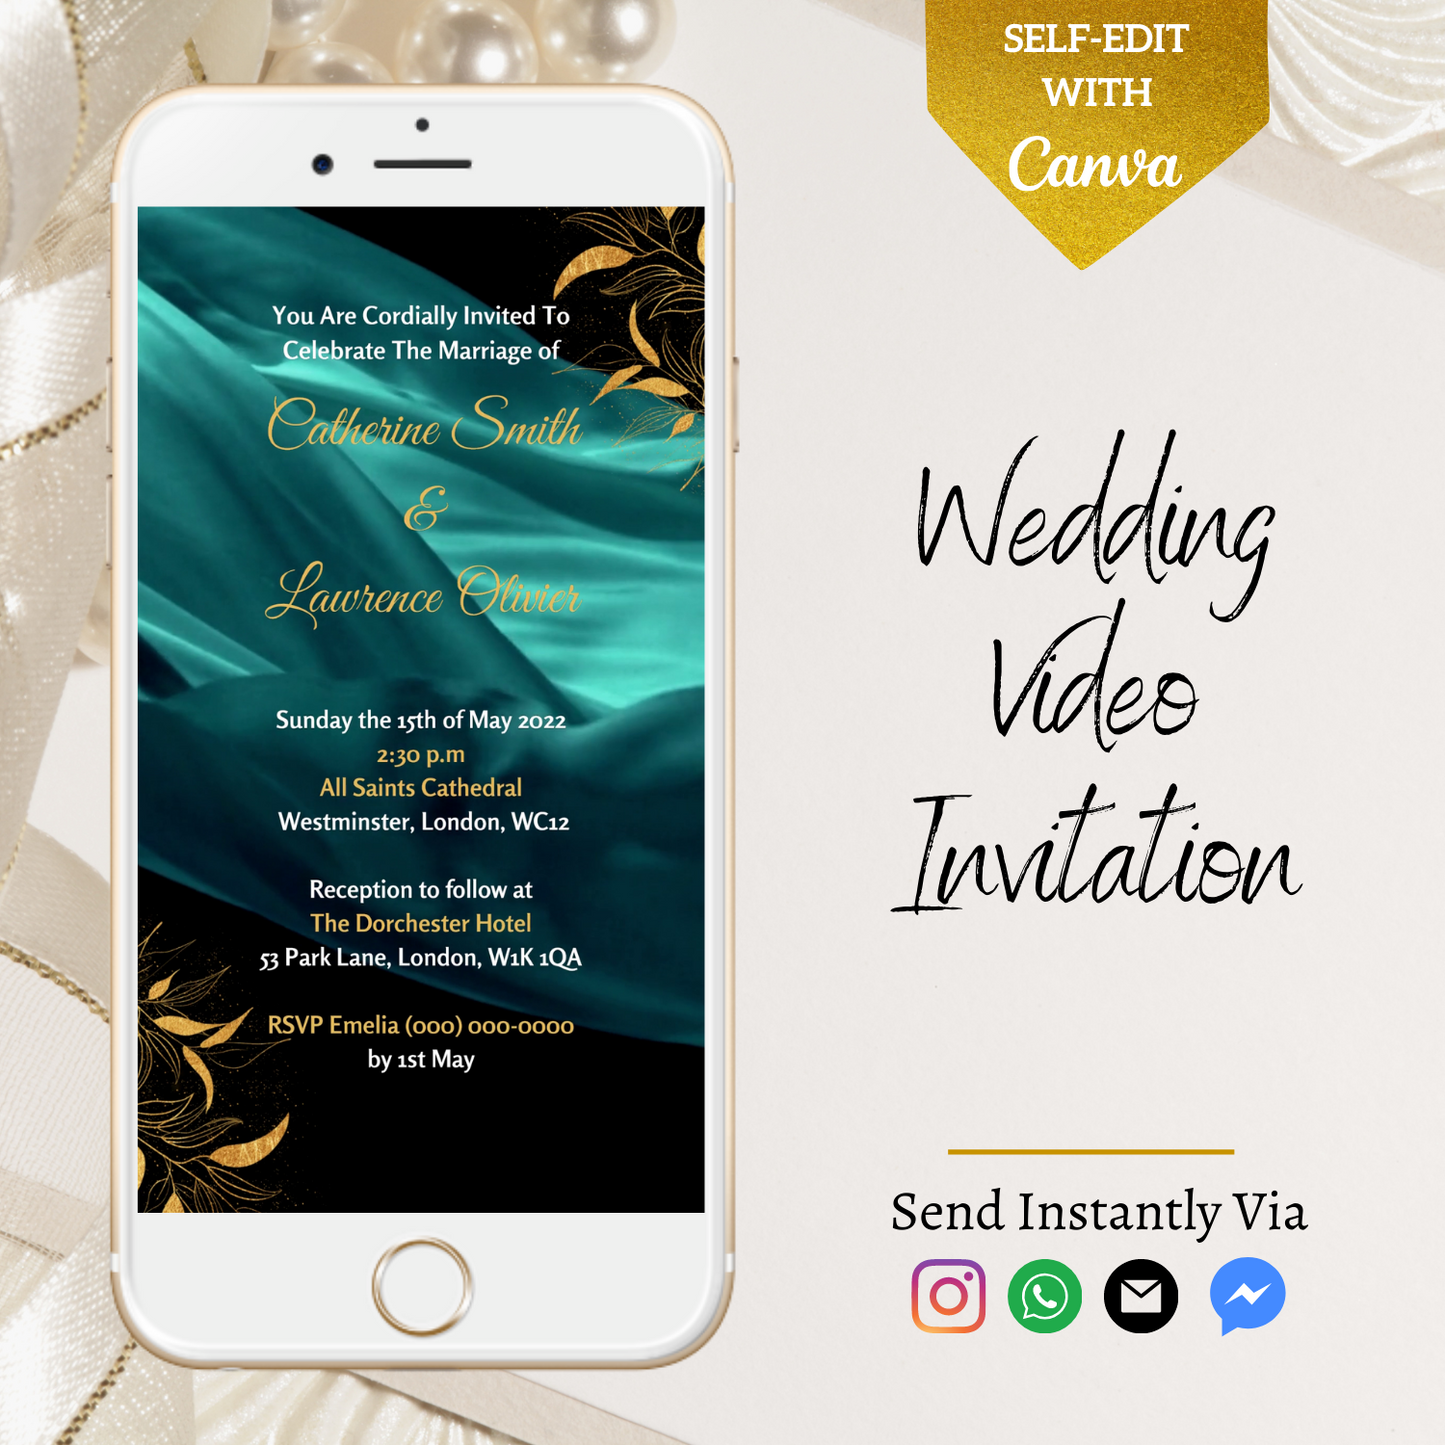 Customizable Green Silk Chiffon Wedding Video Invitation displayed on a smartphone screen, showcasing editable text and design elements for personalizing event details through Canva.